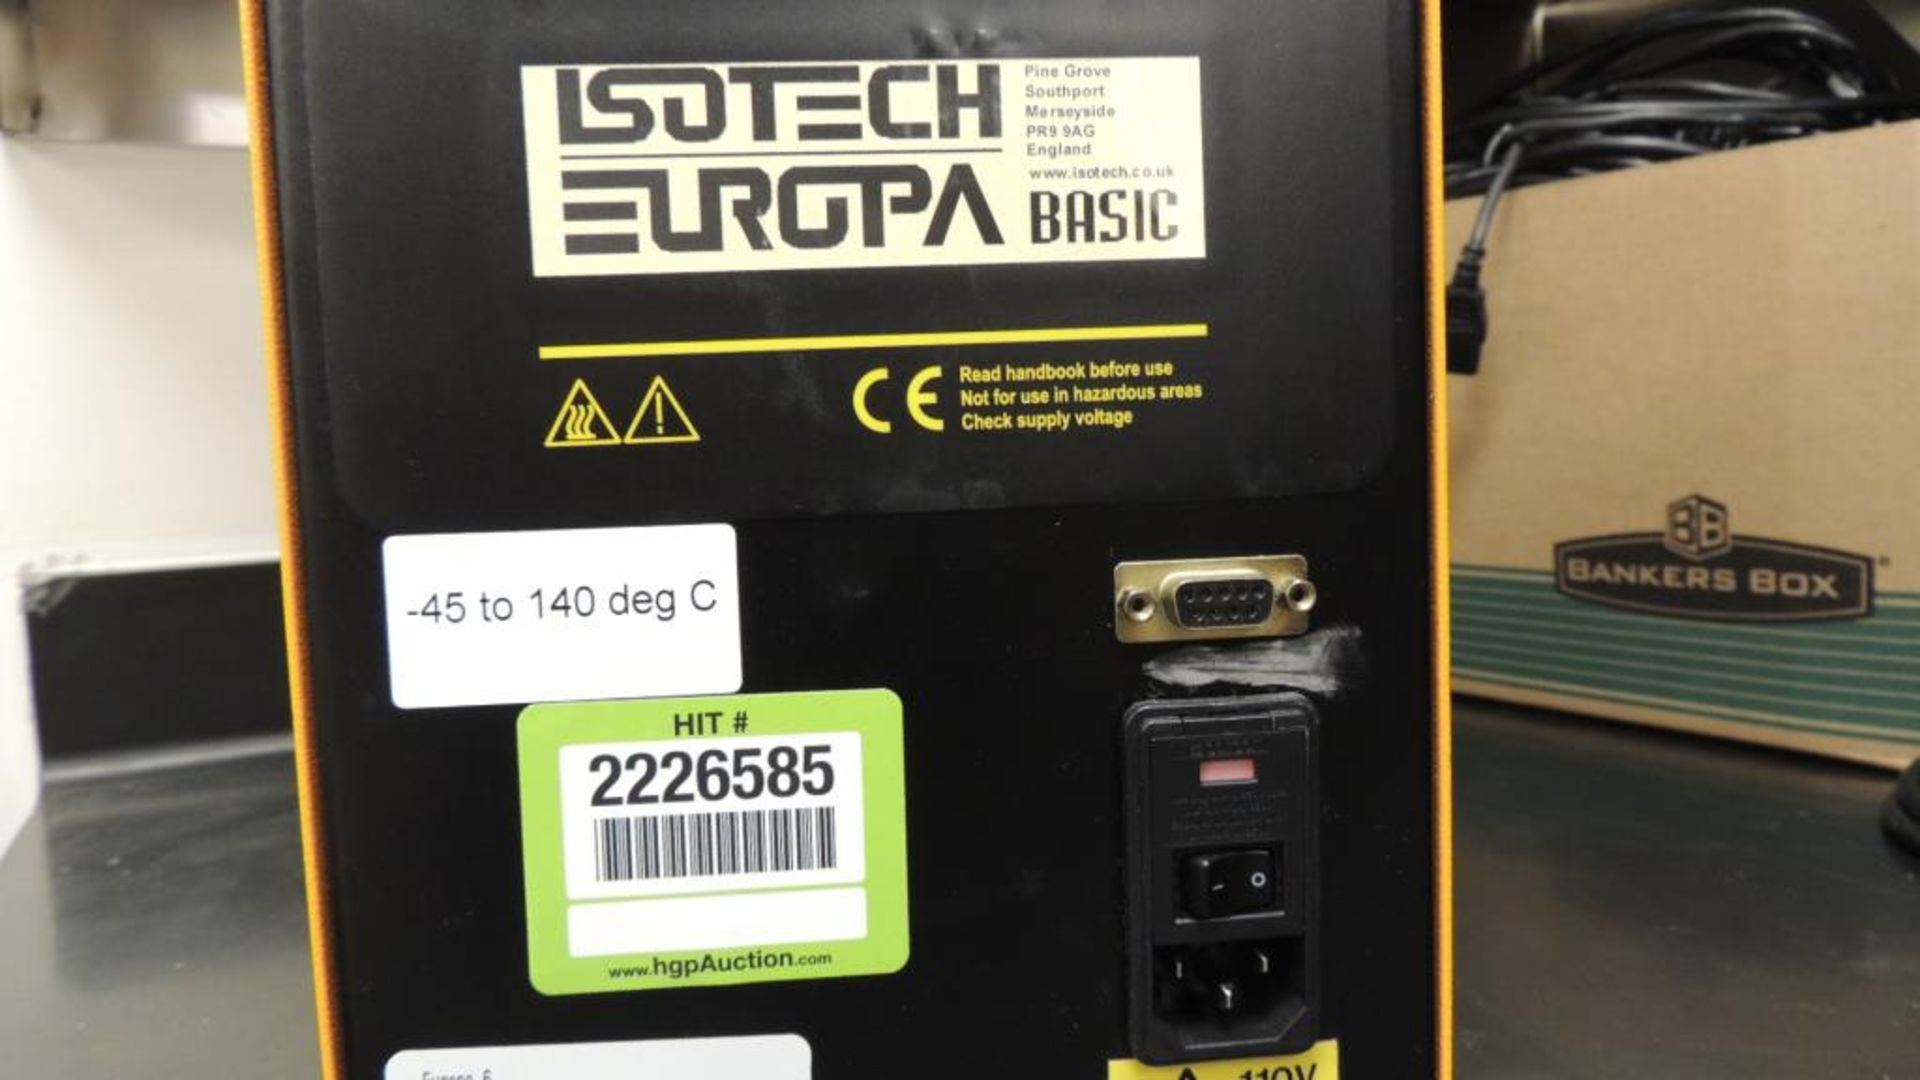 Isotech Europa 6 Bath; portable, product allows flexibility for the calibration of temperature - Image 2 of 4